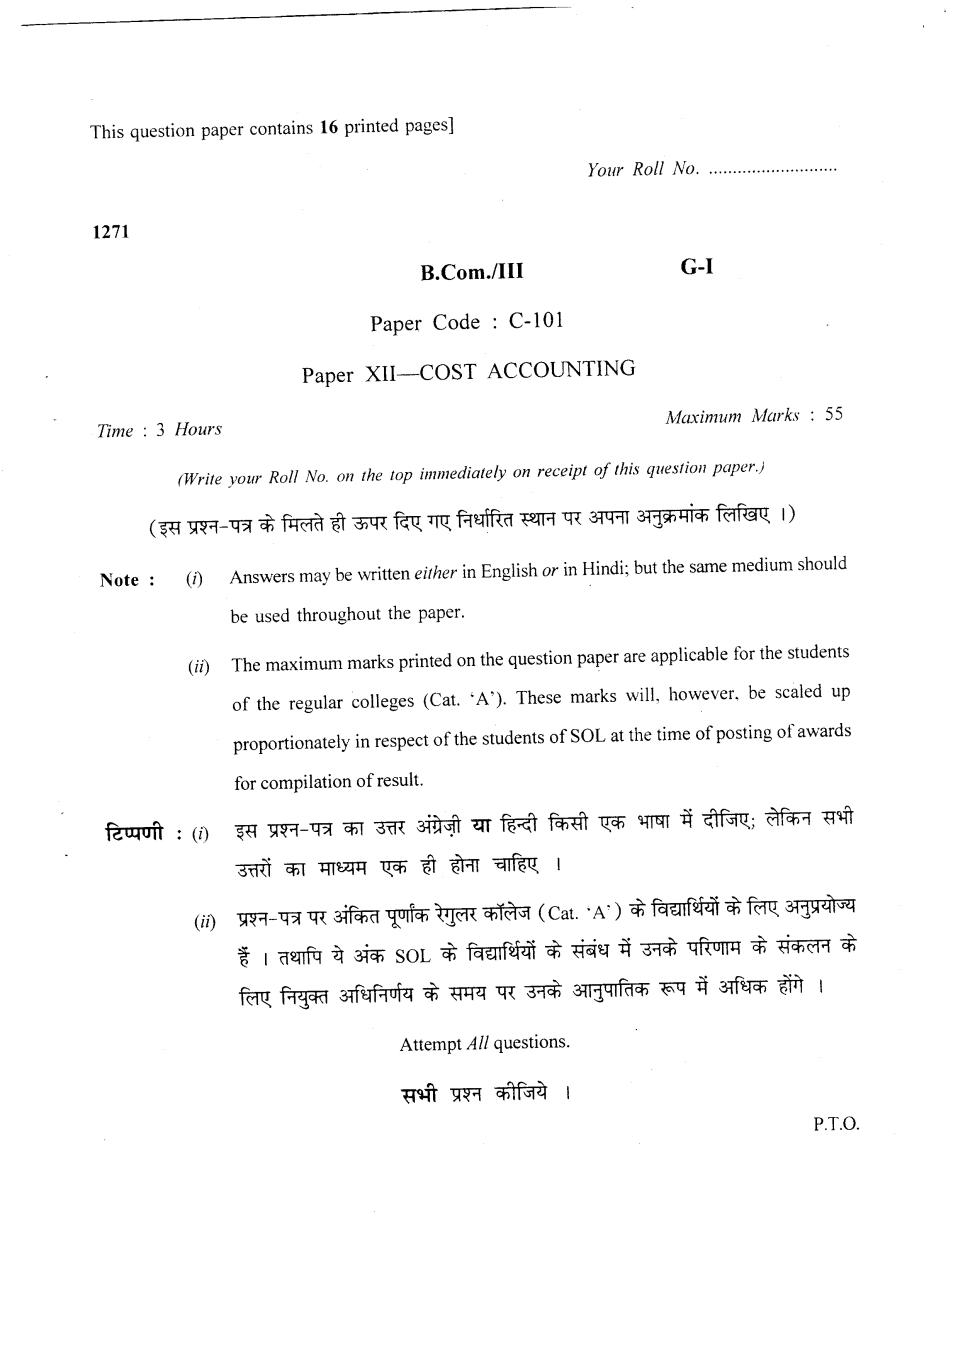 DU SOL B.Com Question Paper 3rd Year 2018 Cost Accounting - Page 1